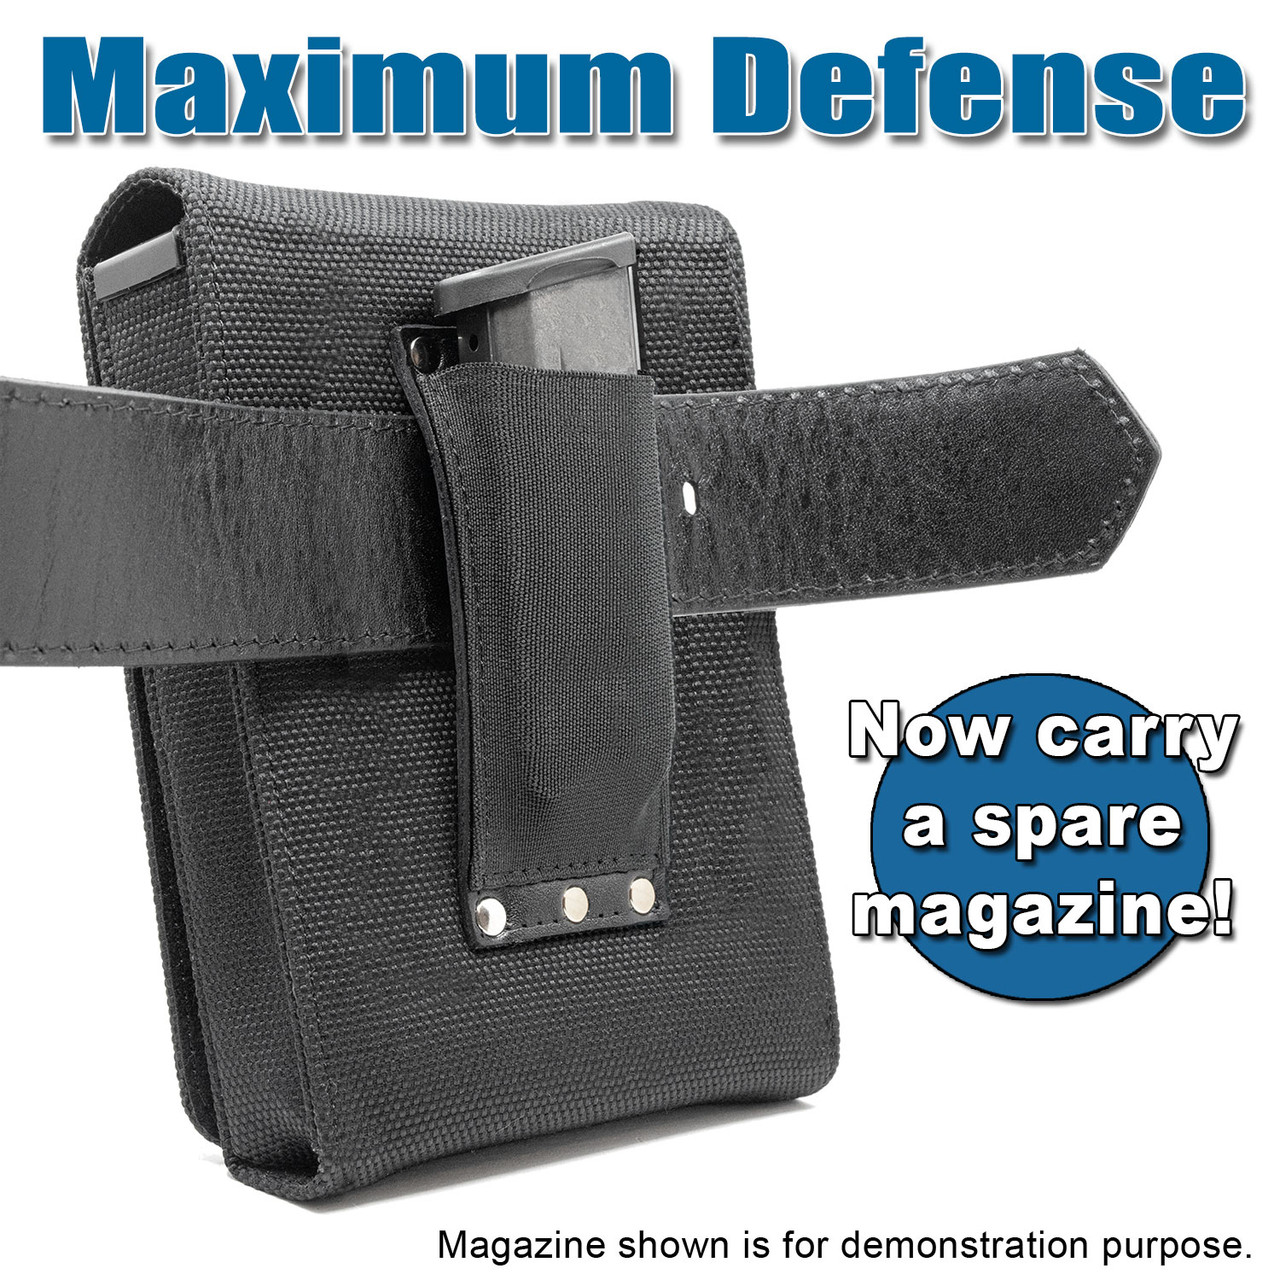 The Taurus Model 85 Special Max Defense Holster